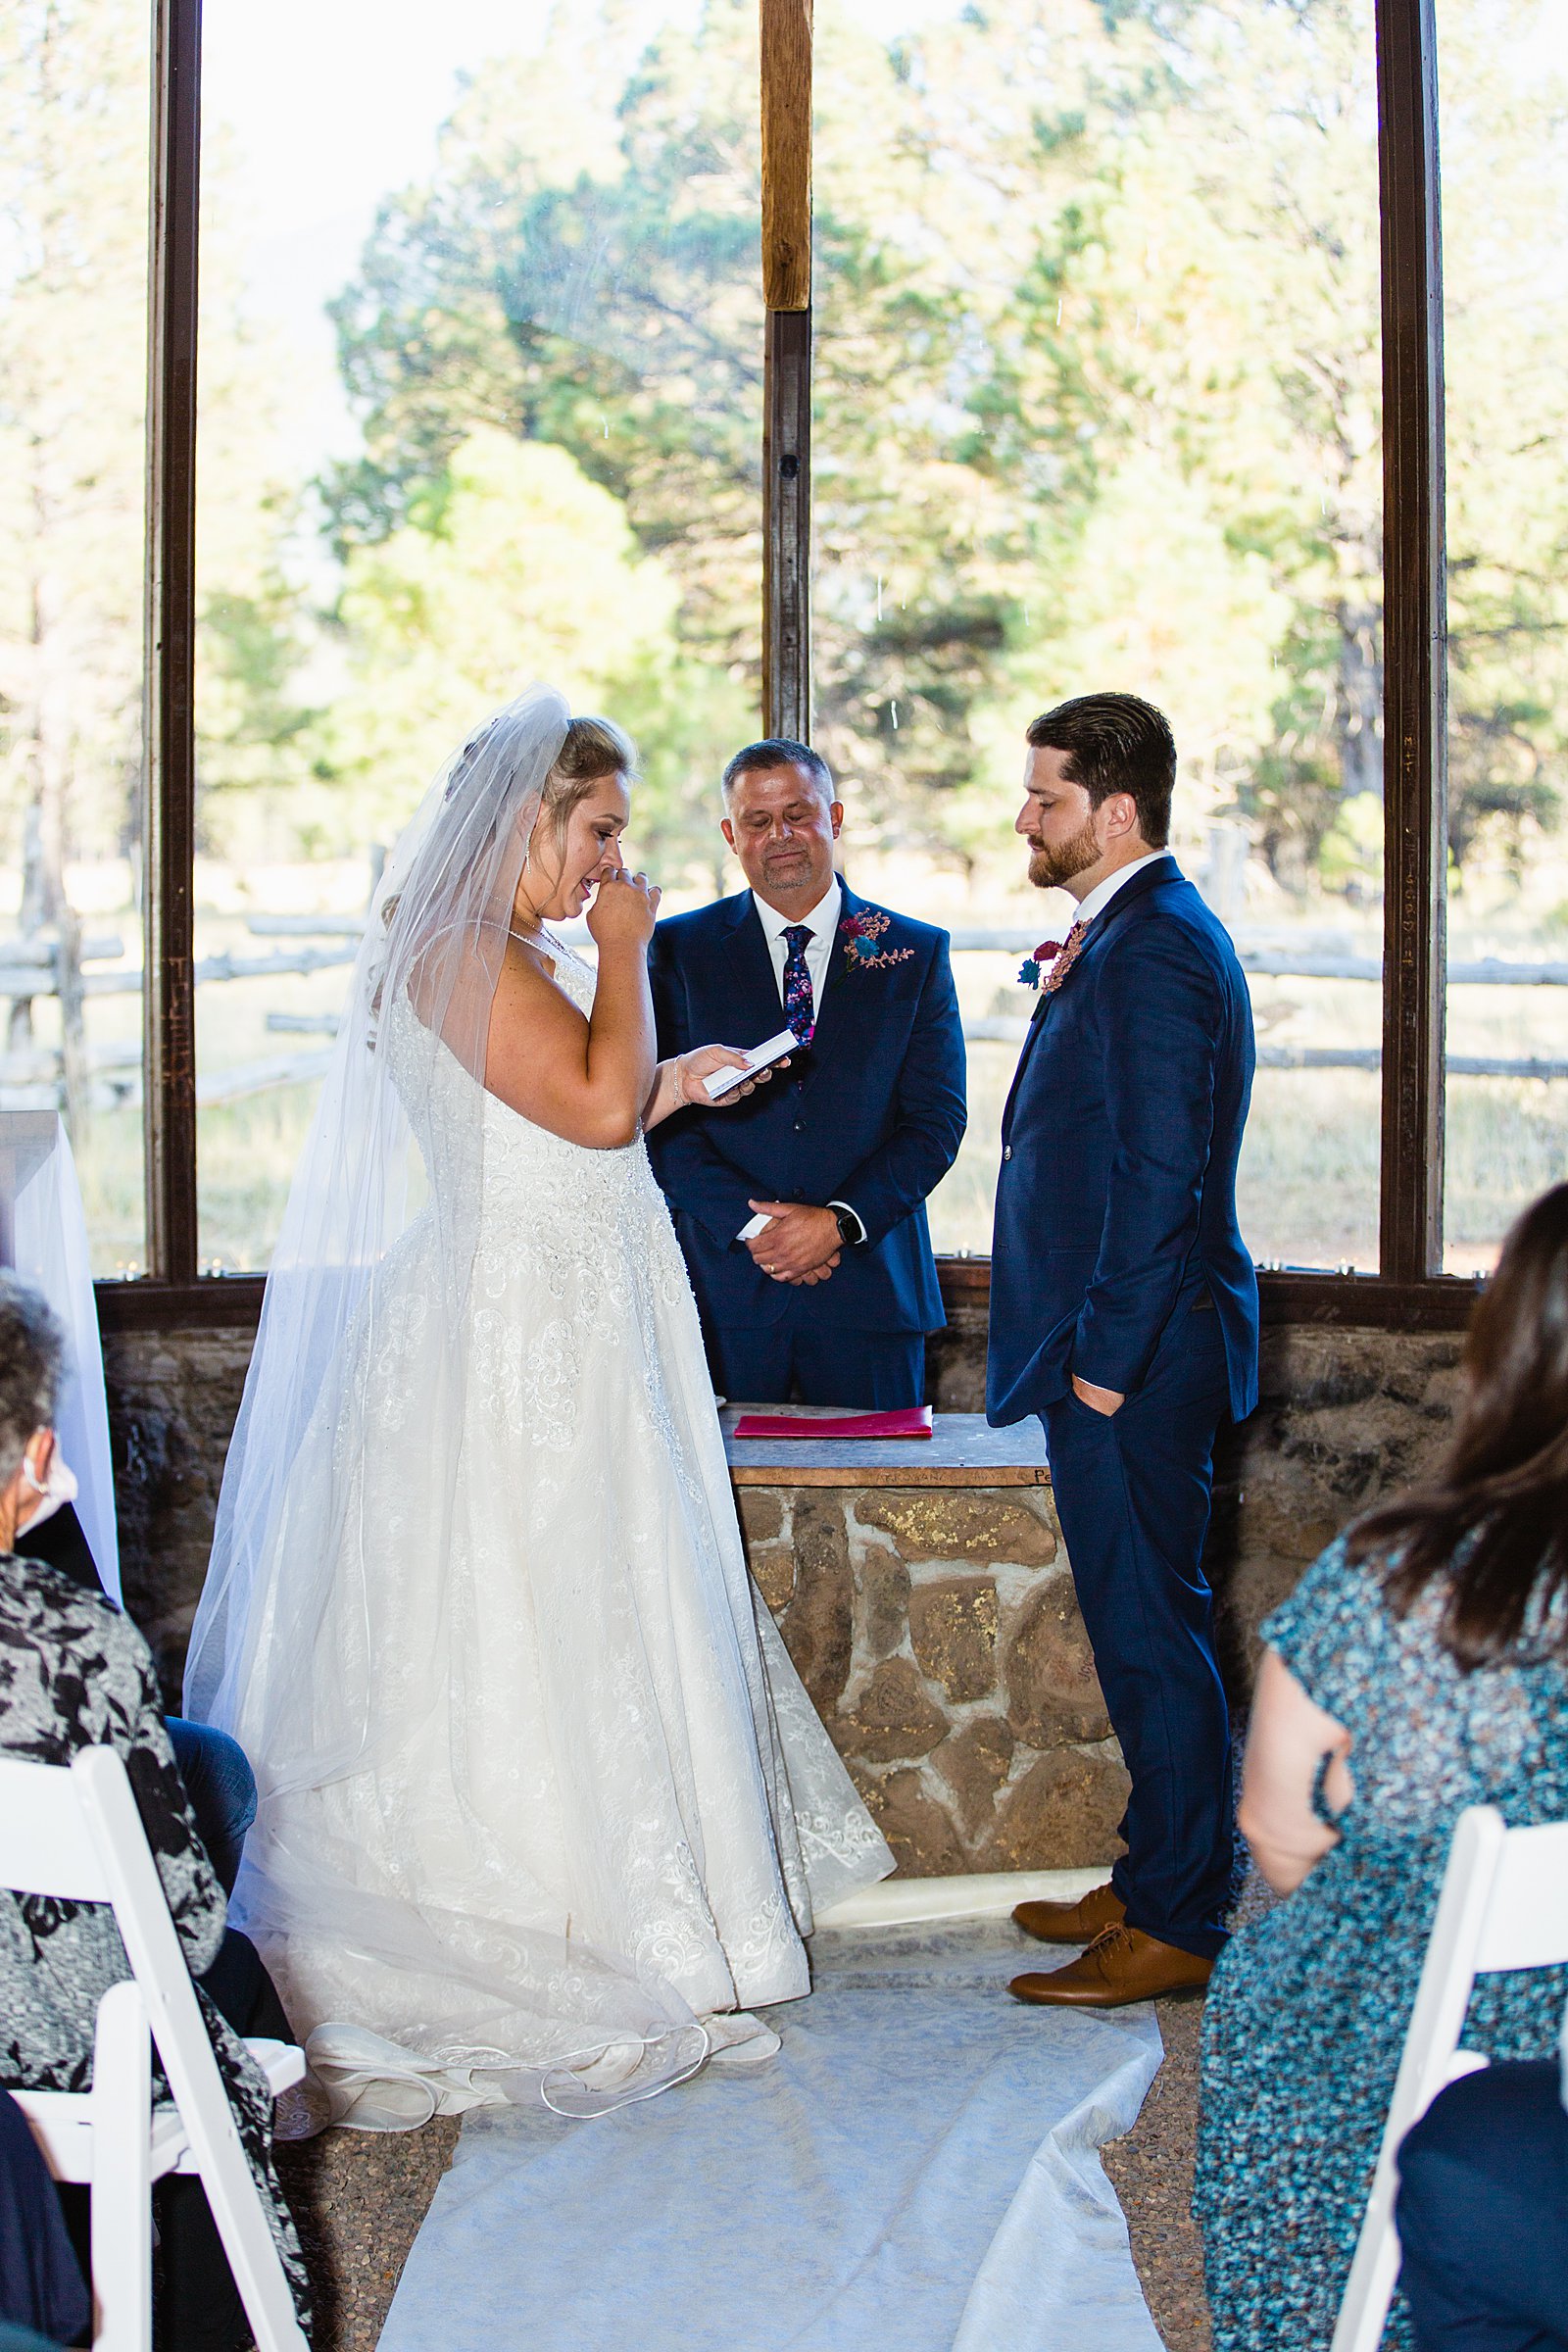 Bride reading her vows to the groom during a Chapel of the Holy Dove wedding ceremony by Flagstaff wedding photographer PMA Photography.